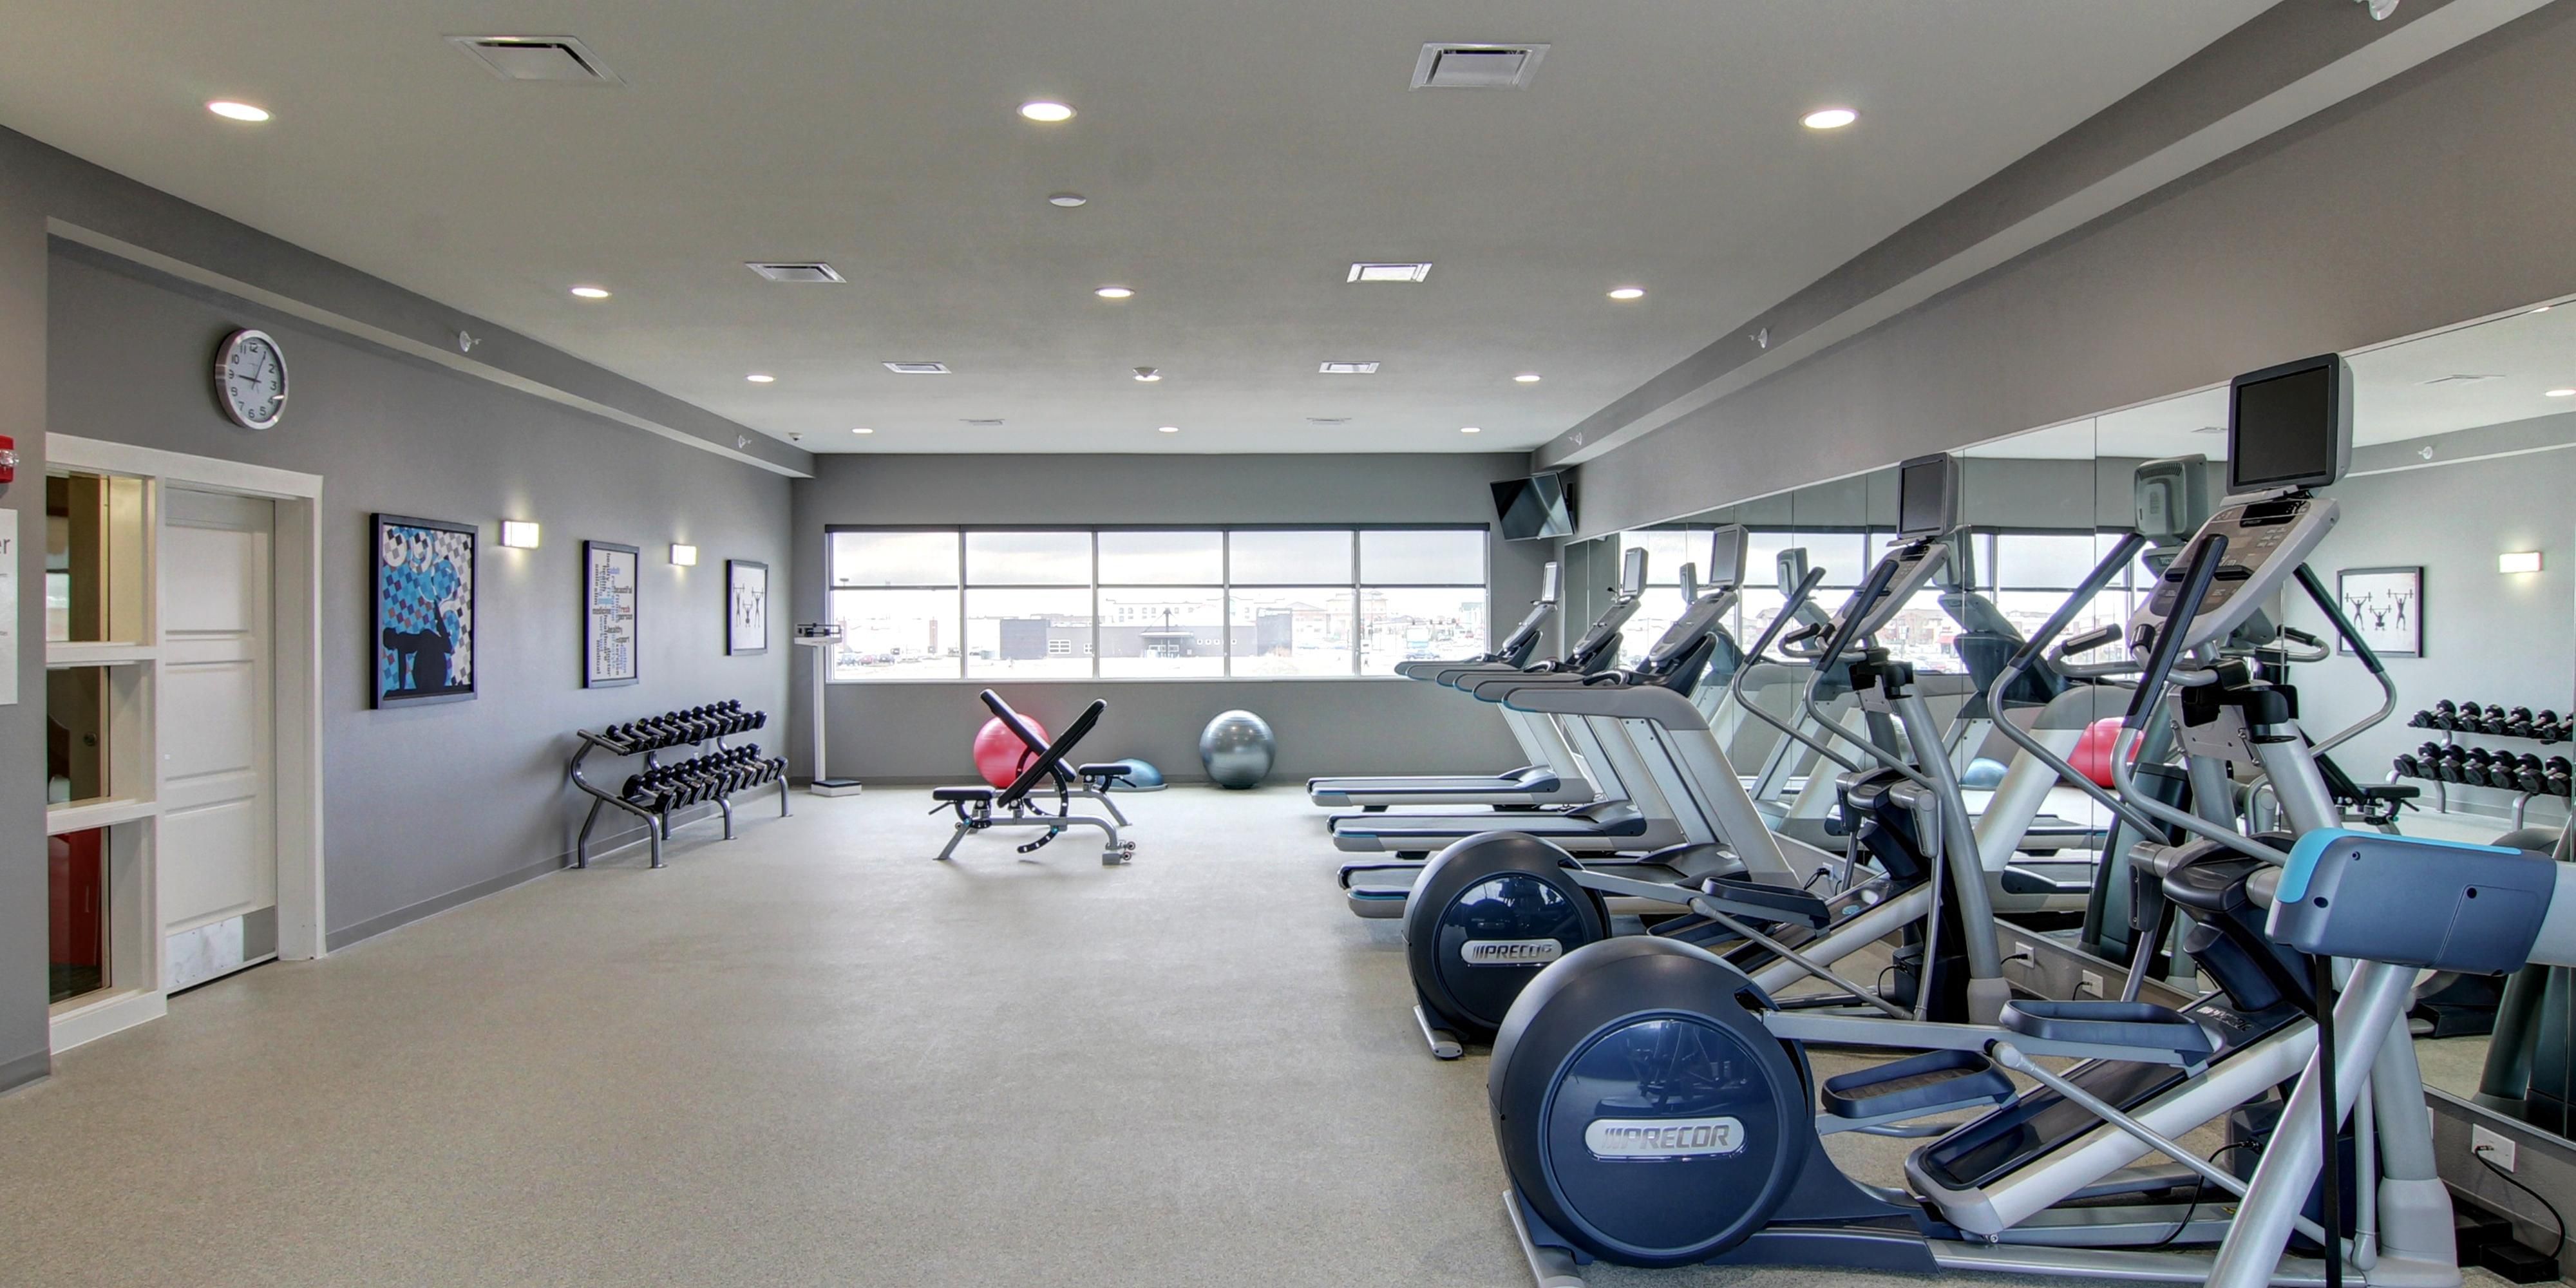 Our expansive updated fitness center is available 24/7 for guest to reach their fitness goals during travel!